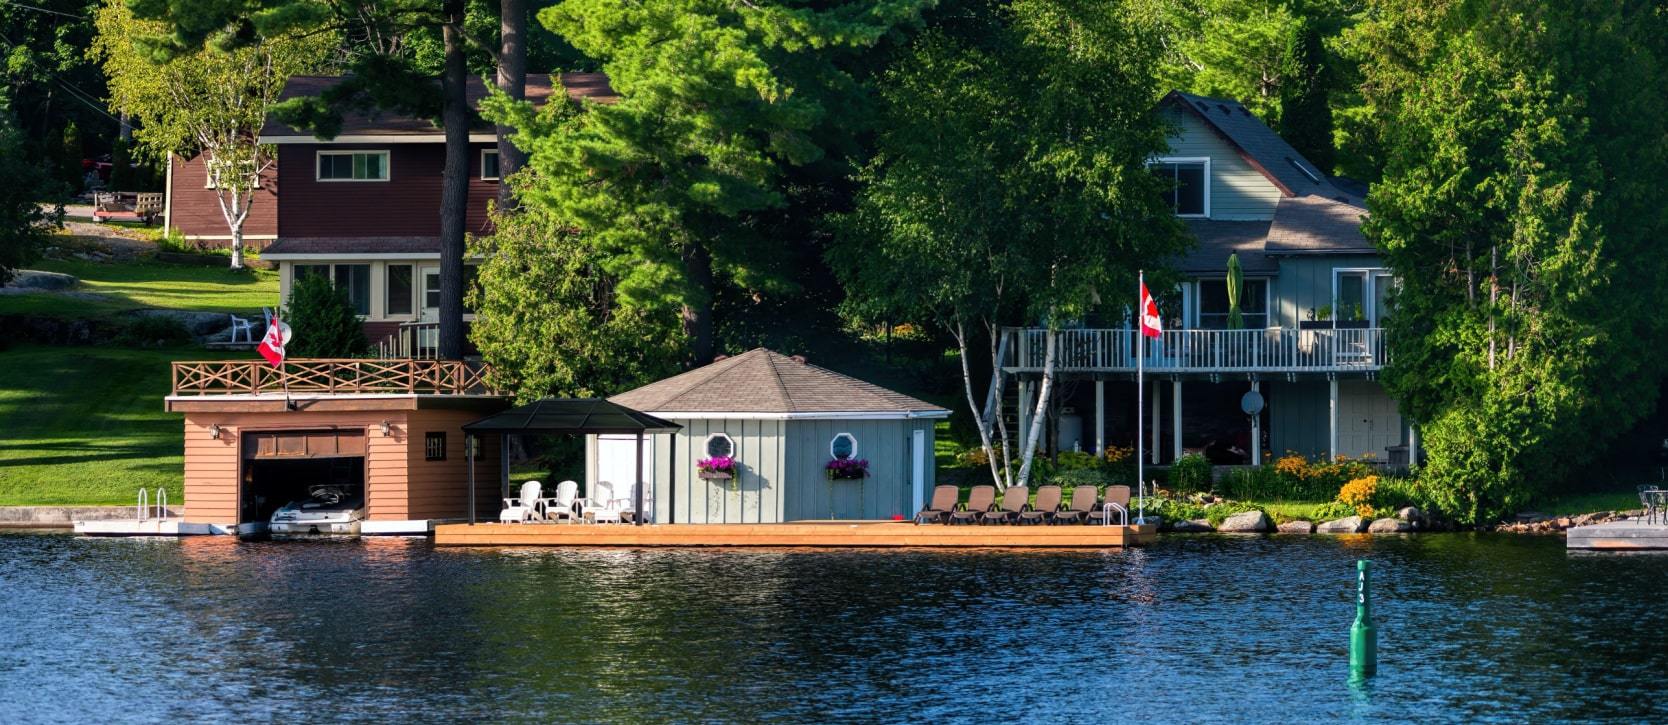 Cottages on a lake in cottage country, Ontario